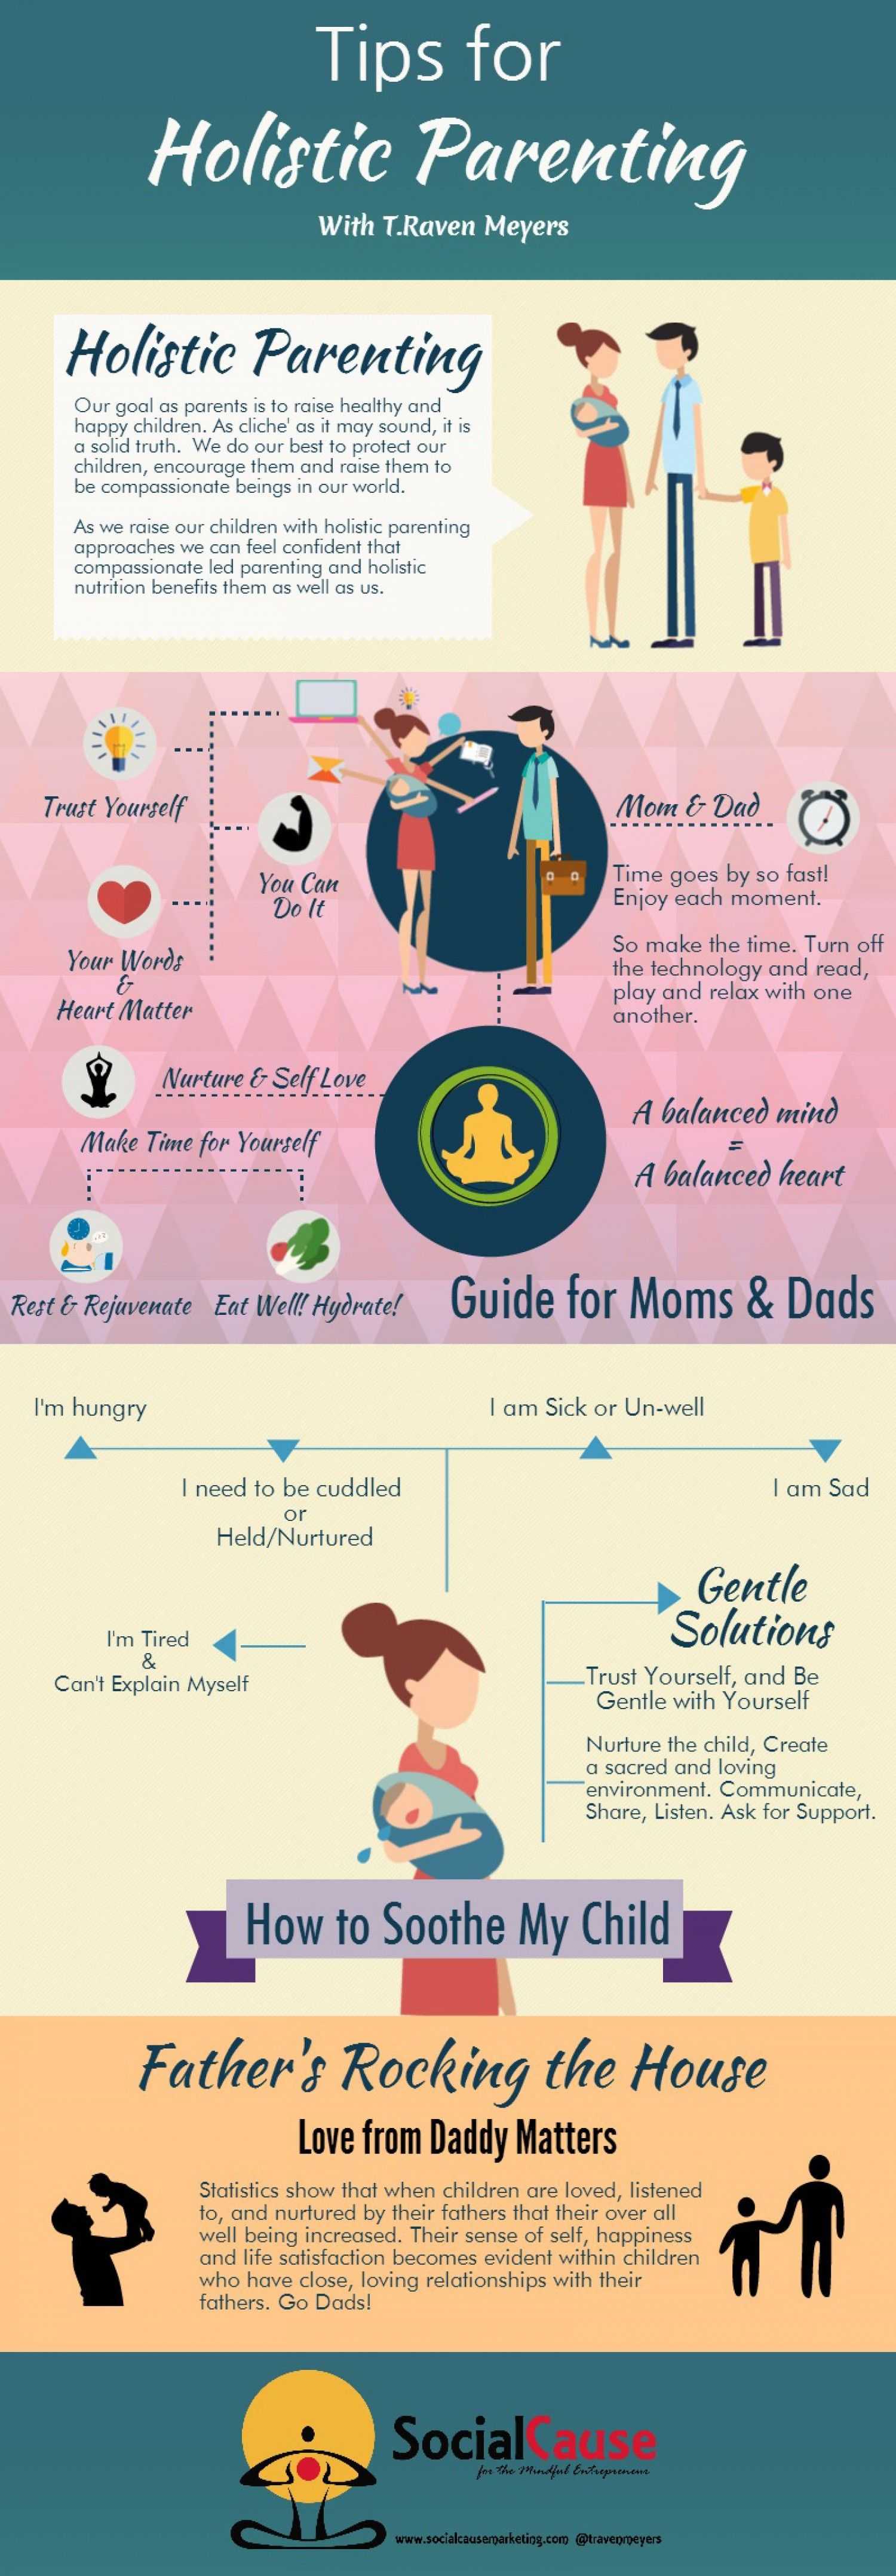 Tips For Holistic Parenting